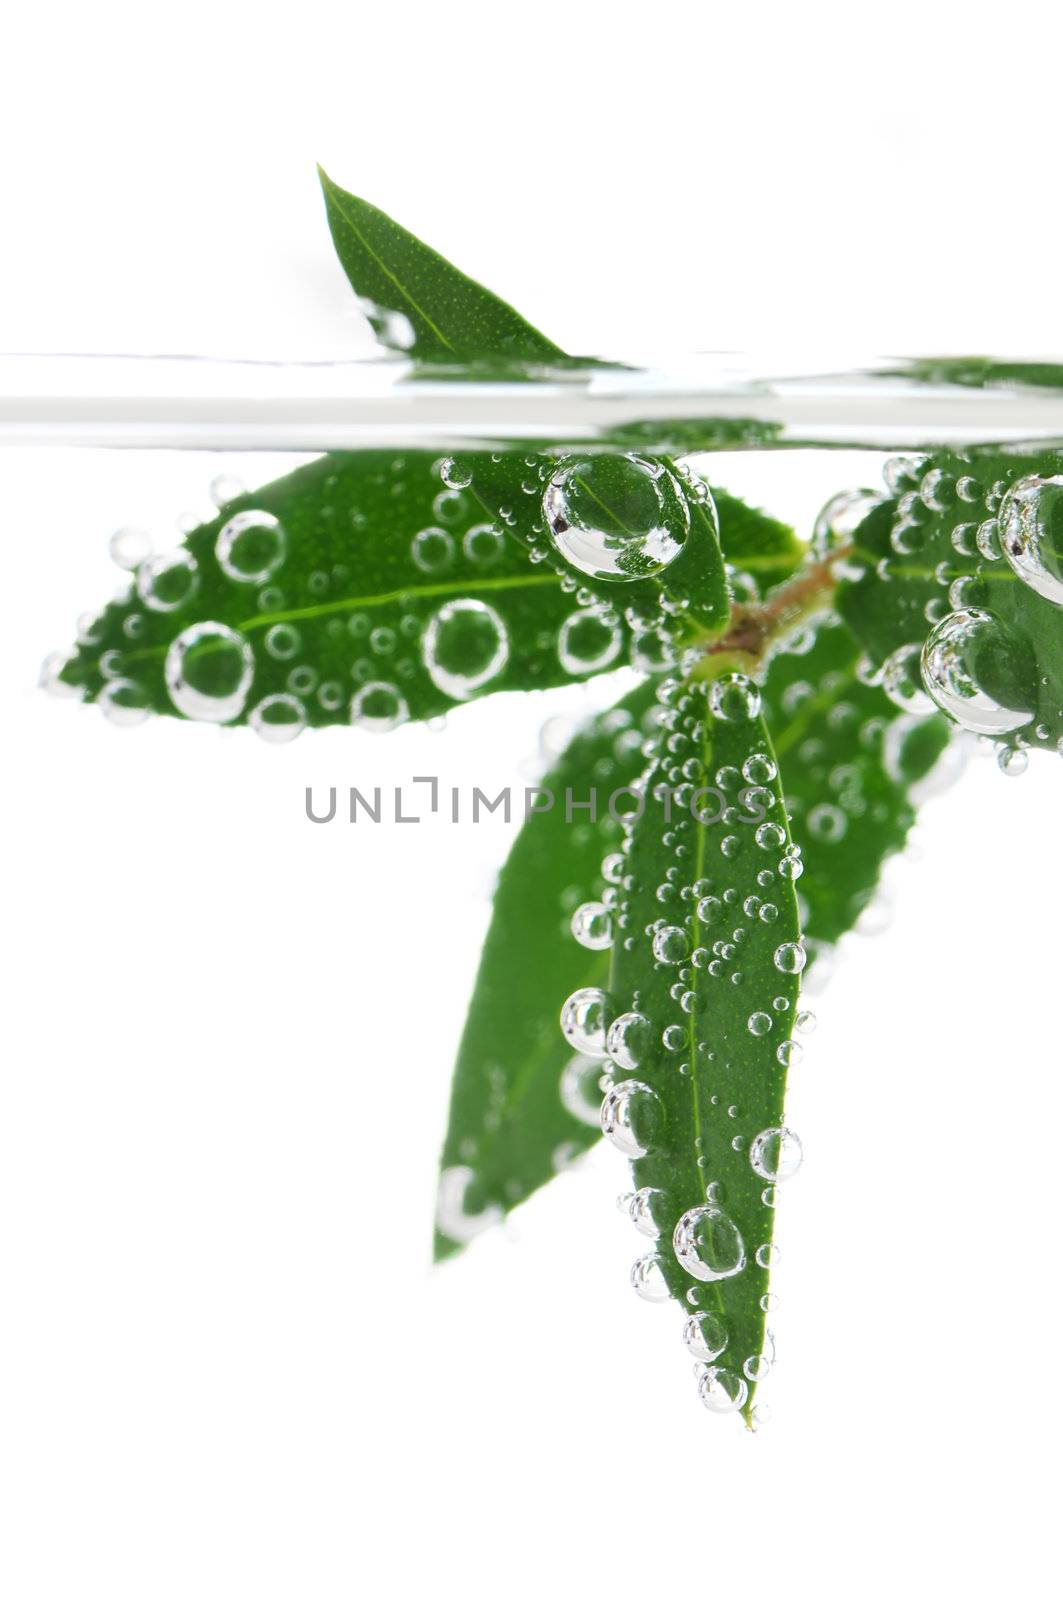 Green leaves of a plant submerged in water with air bubbles